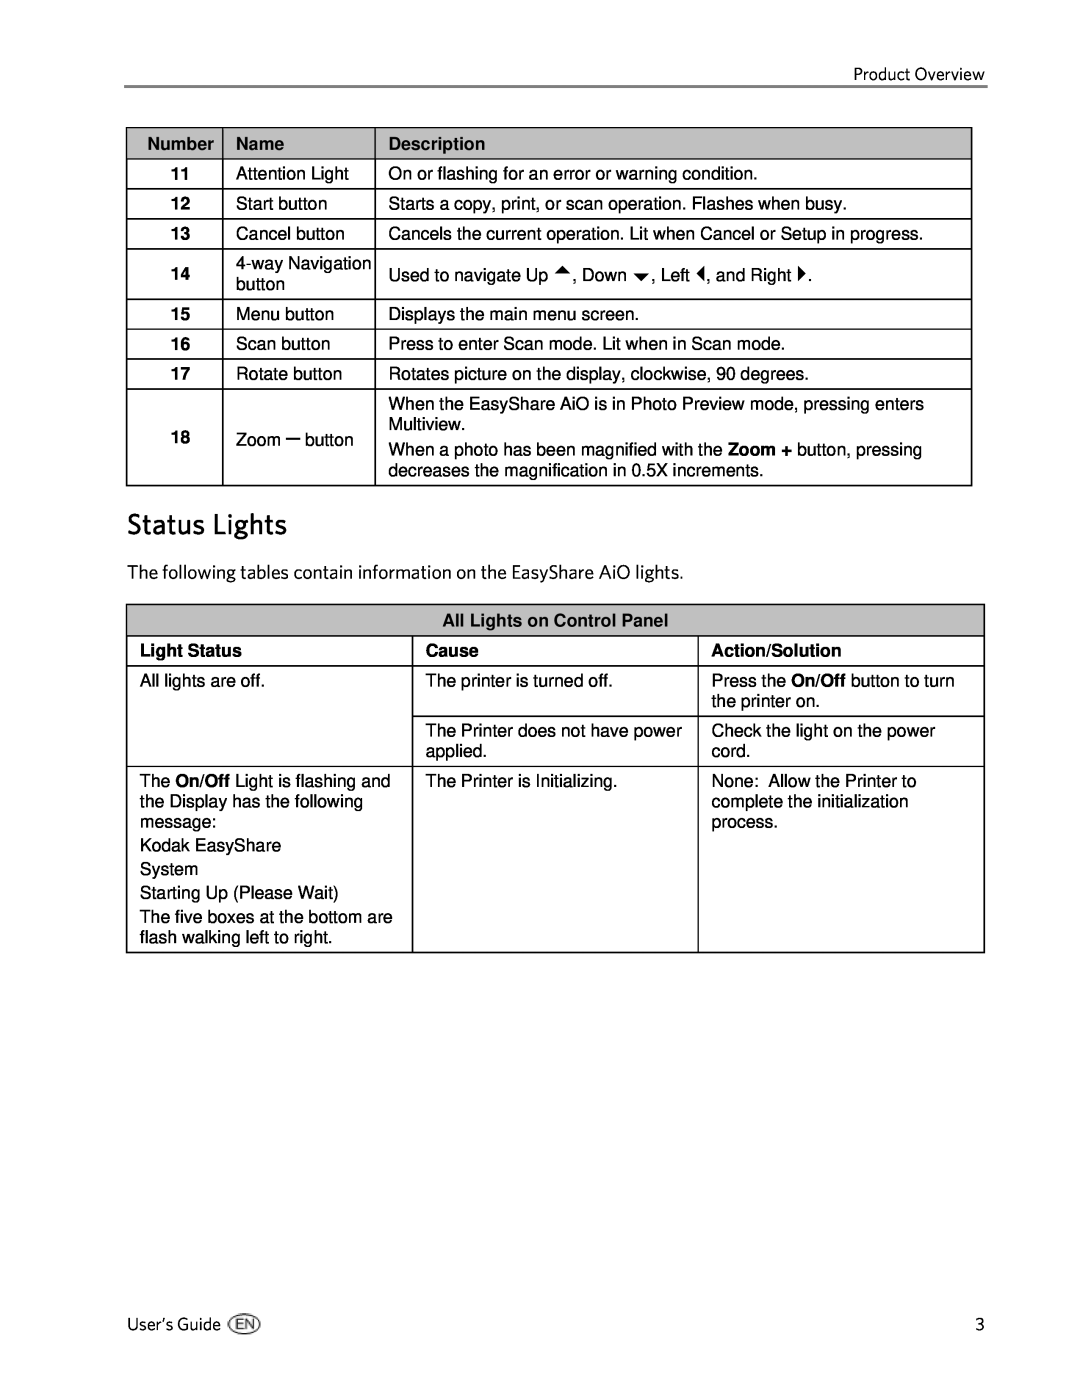 Kodak 5300 manual Status Lights, The following tables contain information on the EasyShare AiO lights 